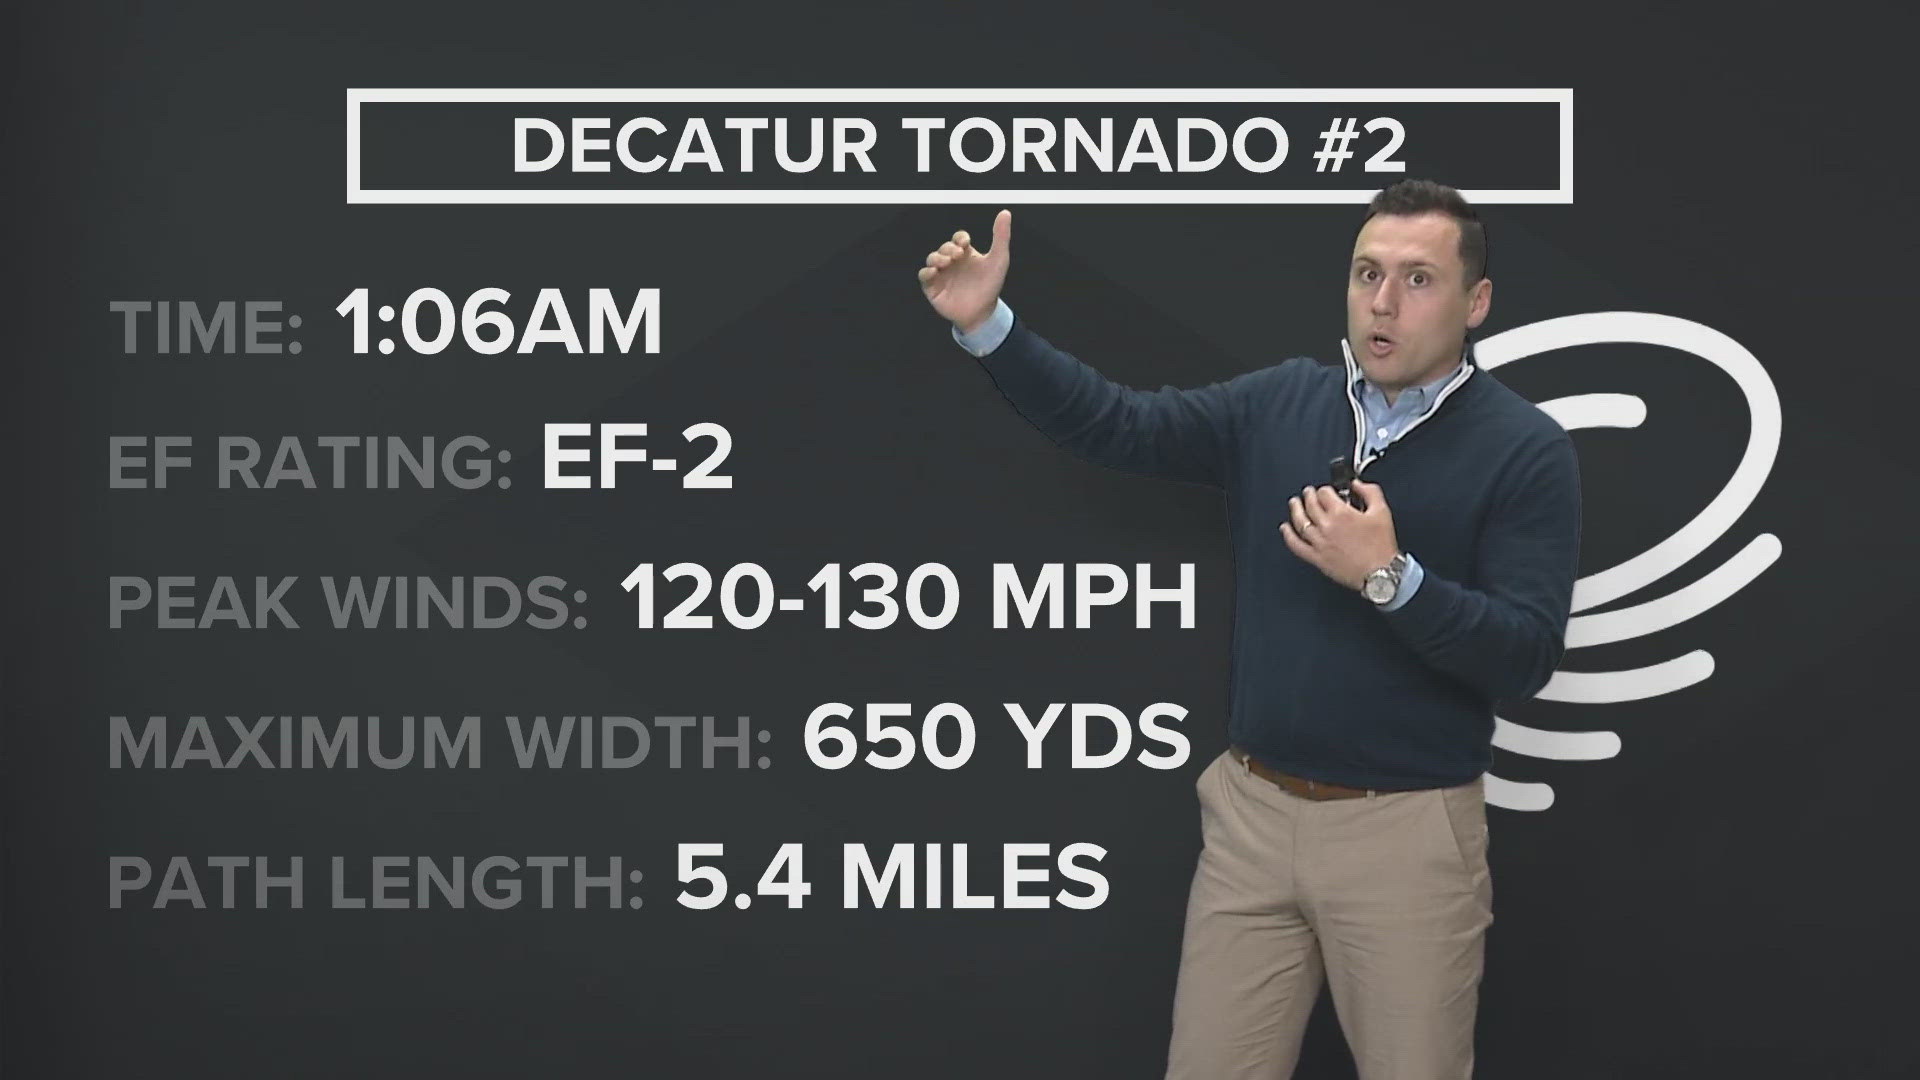 5NEWS Meteorologist Zac Scott is covering what we know about the tornados that hit Arkansas.